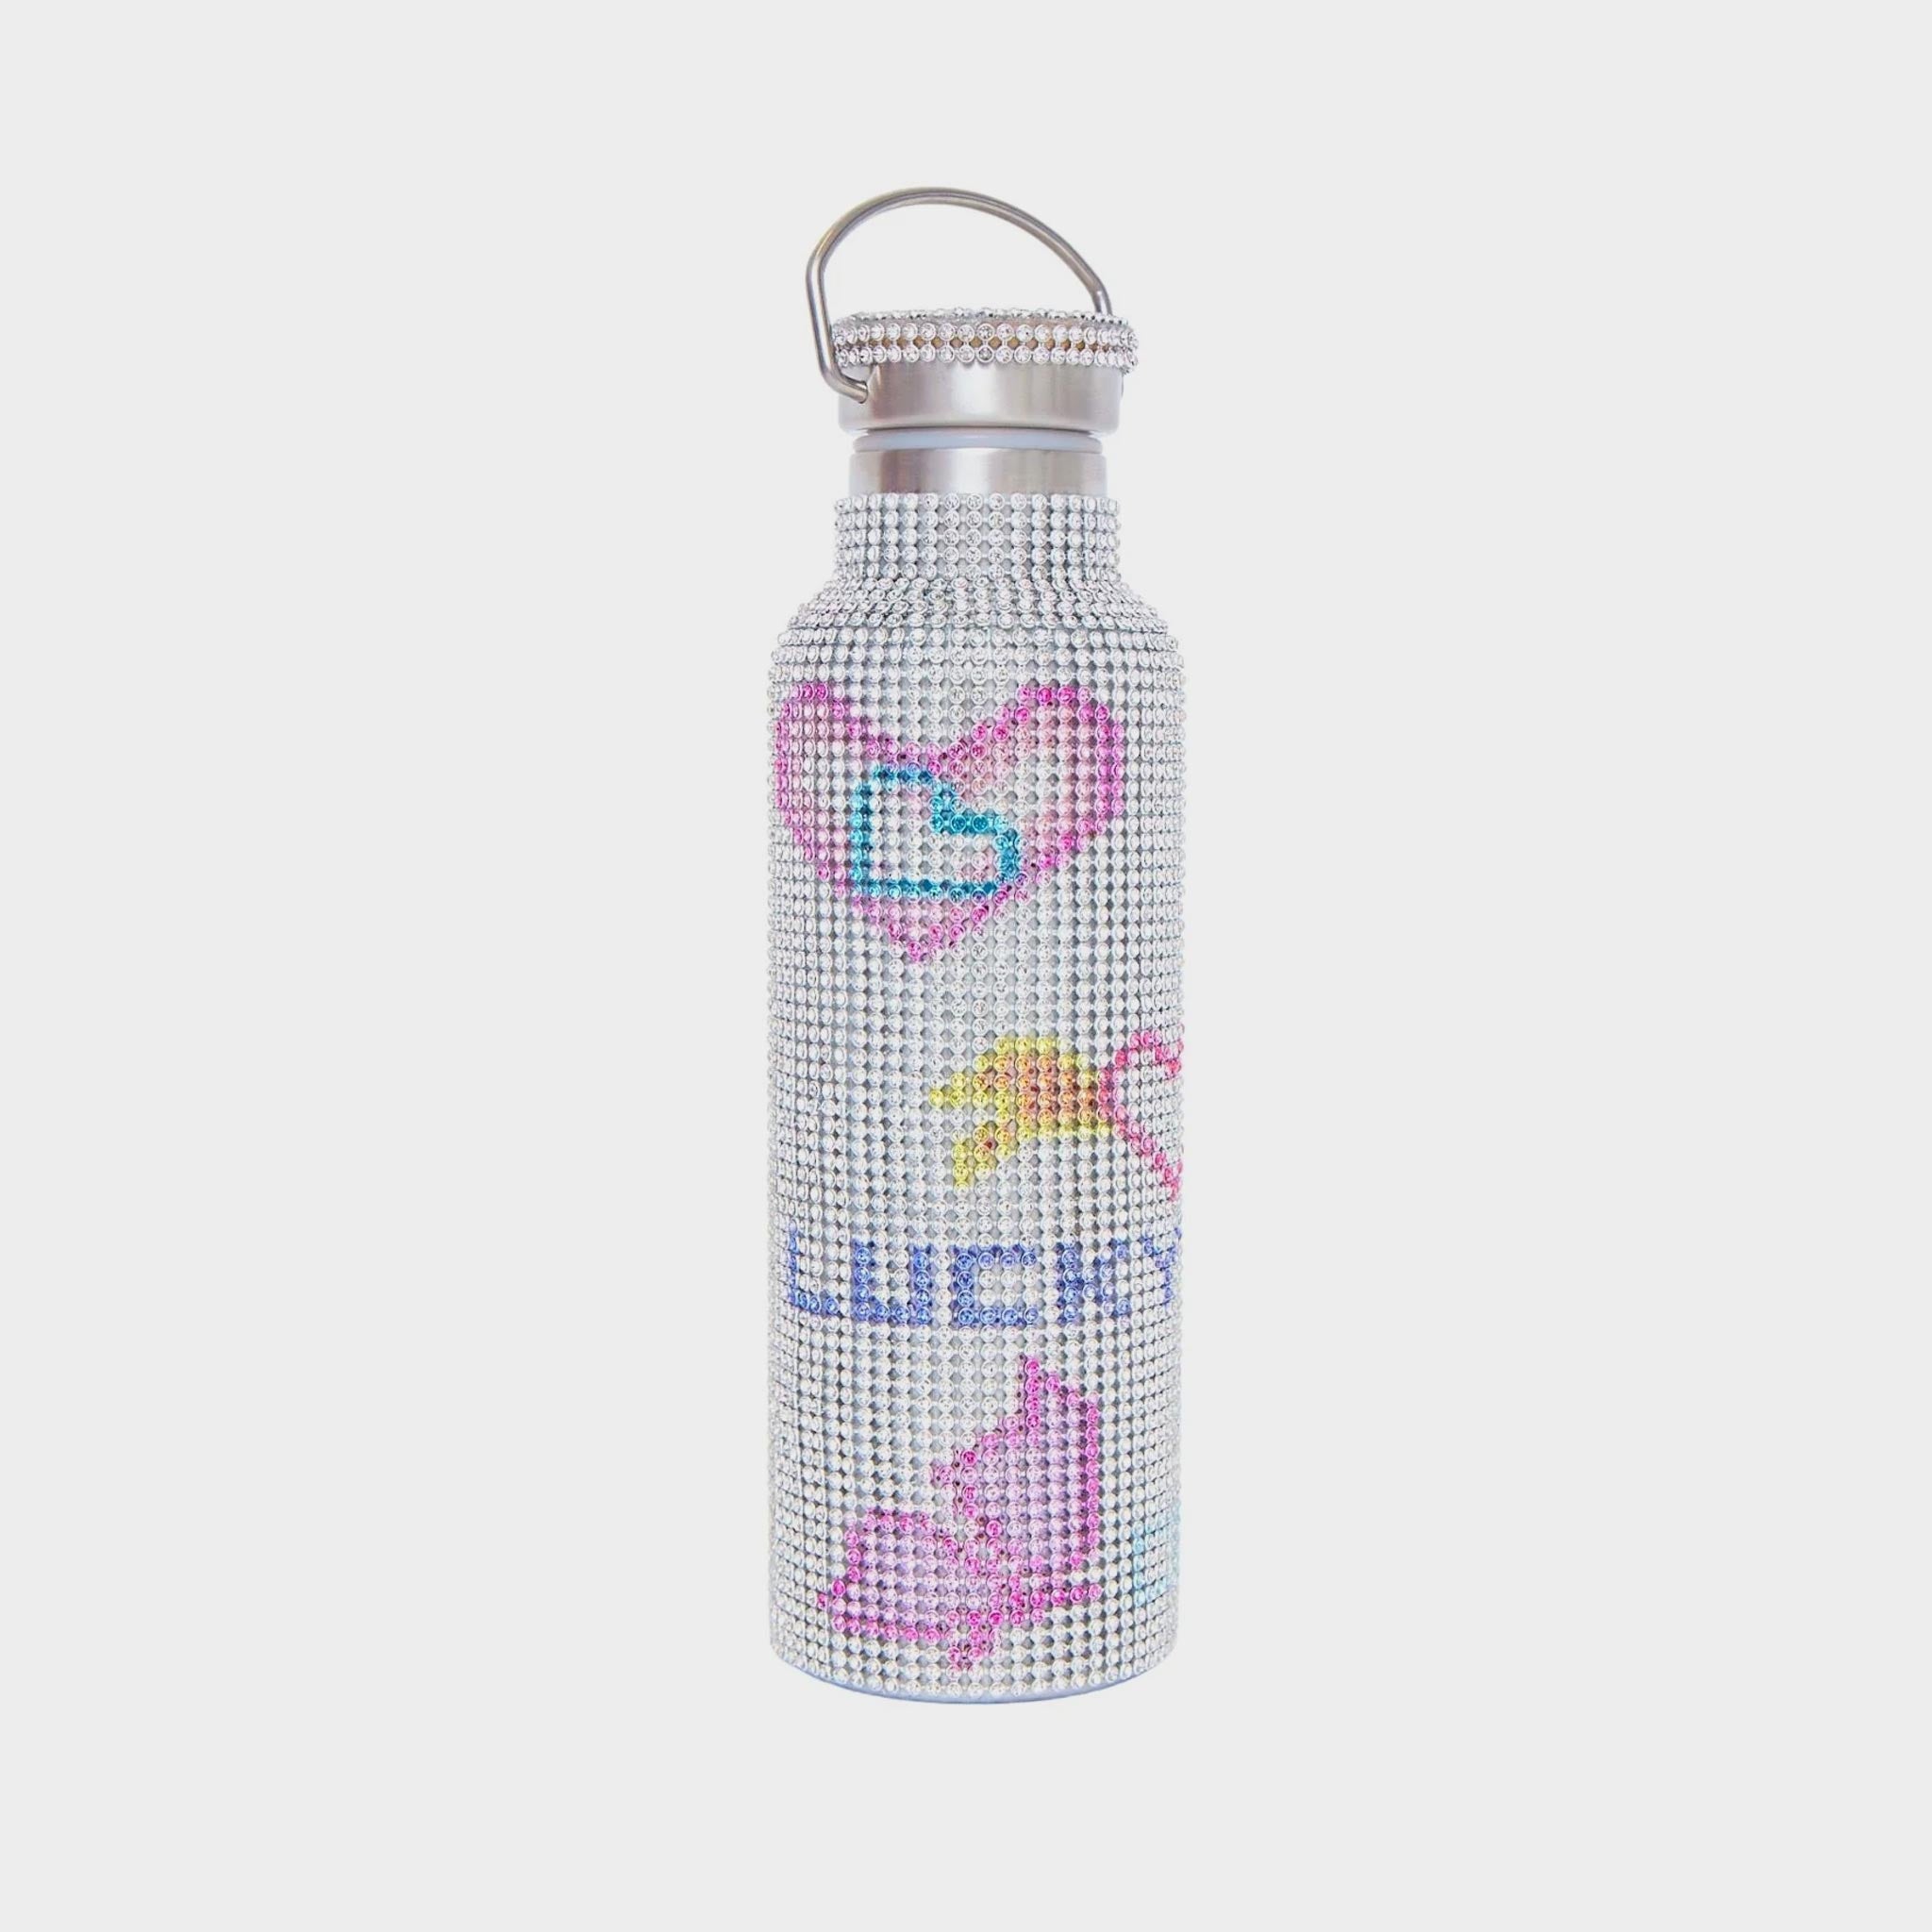 Stainless steel water bottle covered in white rhinestone crystals with a doodled pattern featuring pink hearts and the word Lucky.